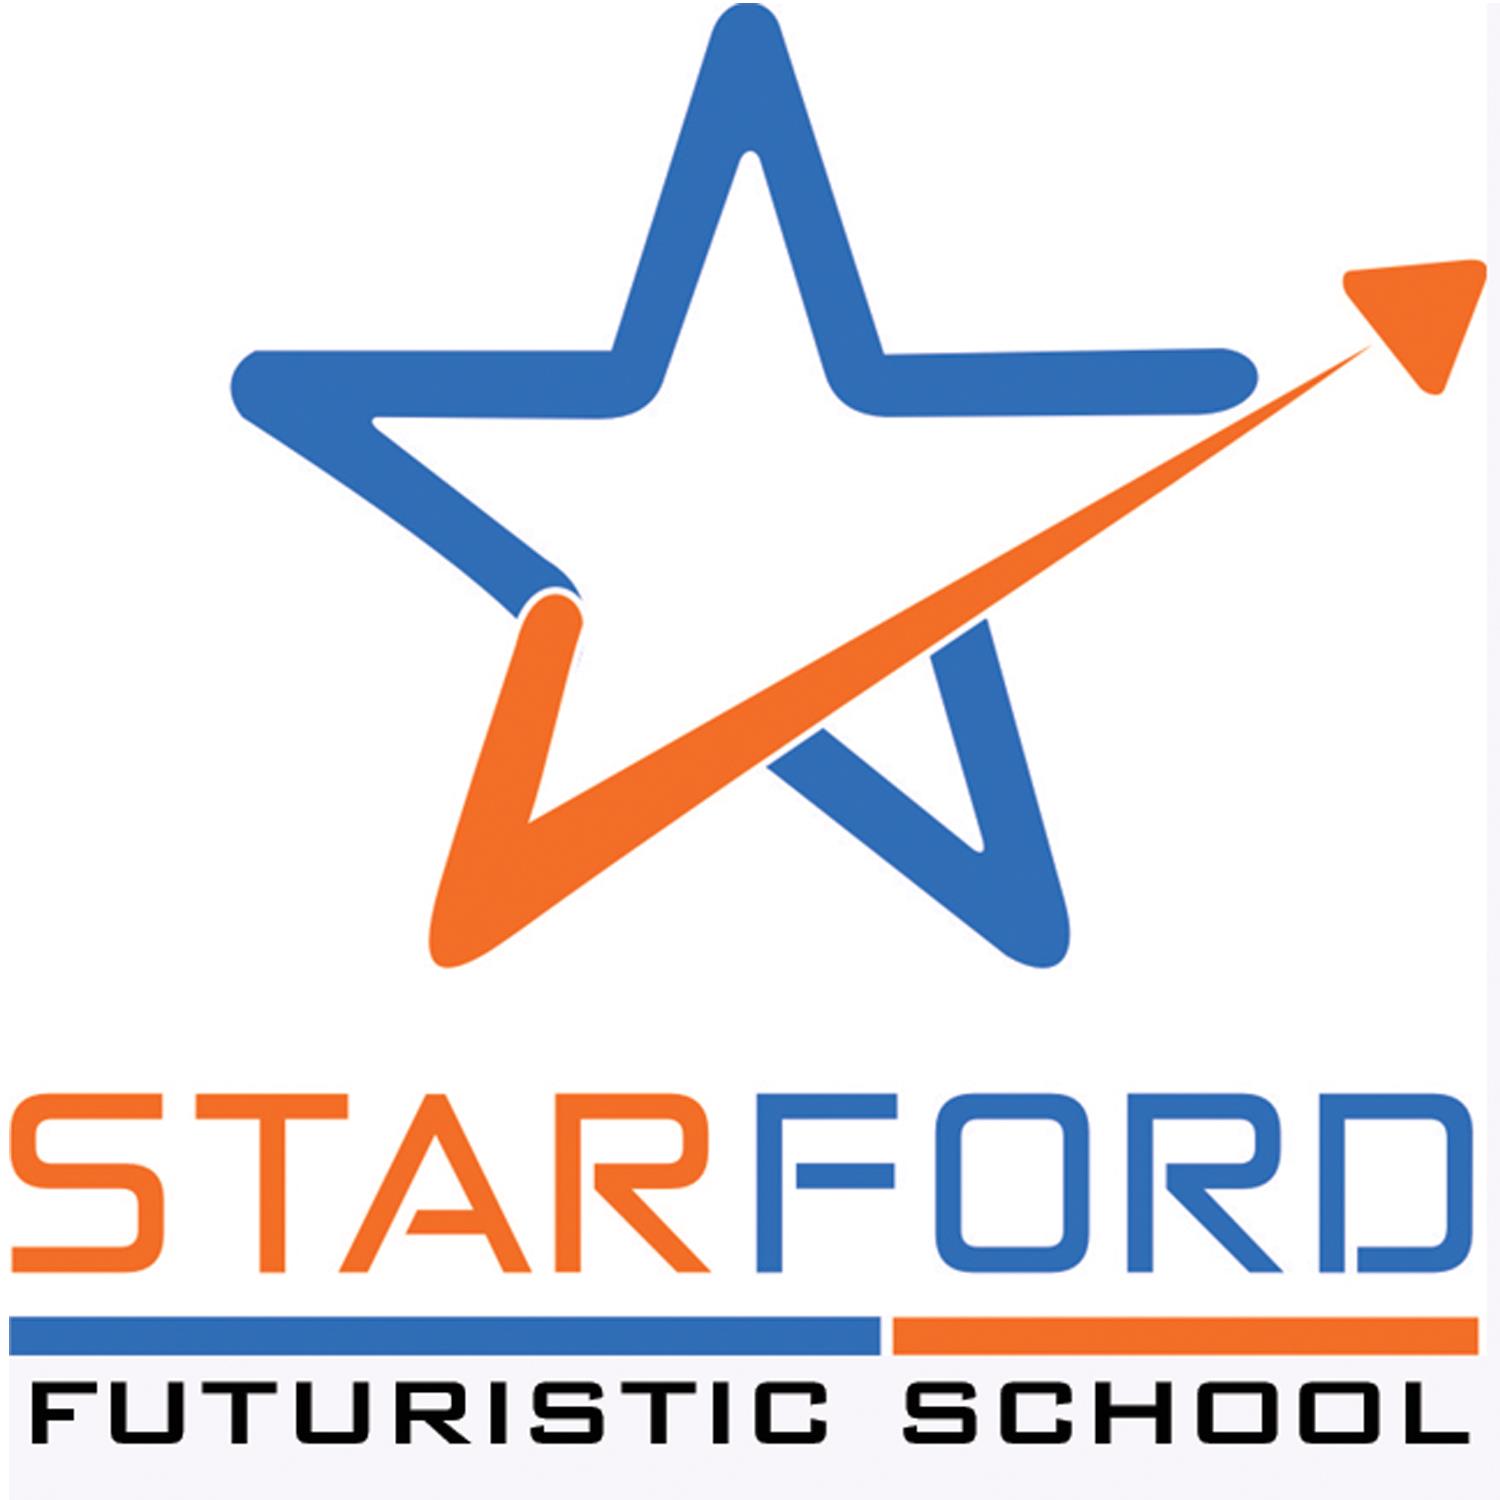 Starford School|Colleges|Education